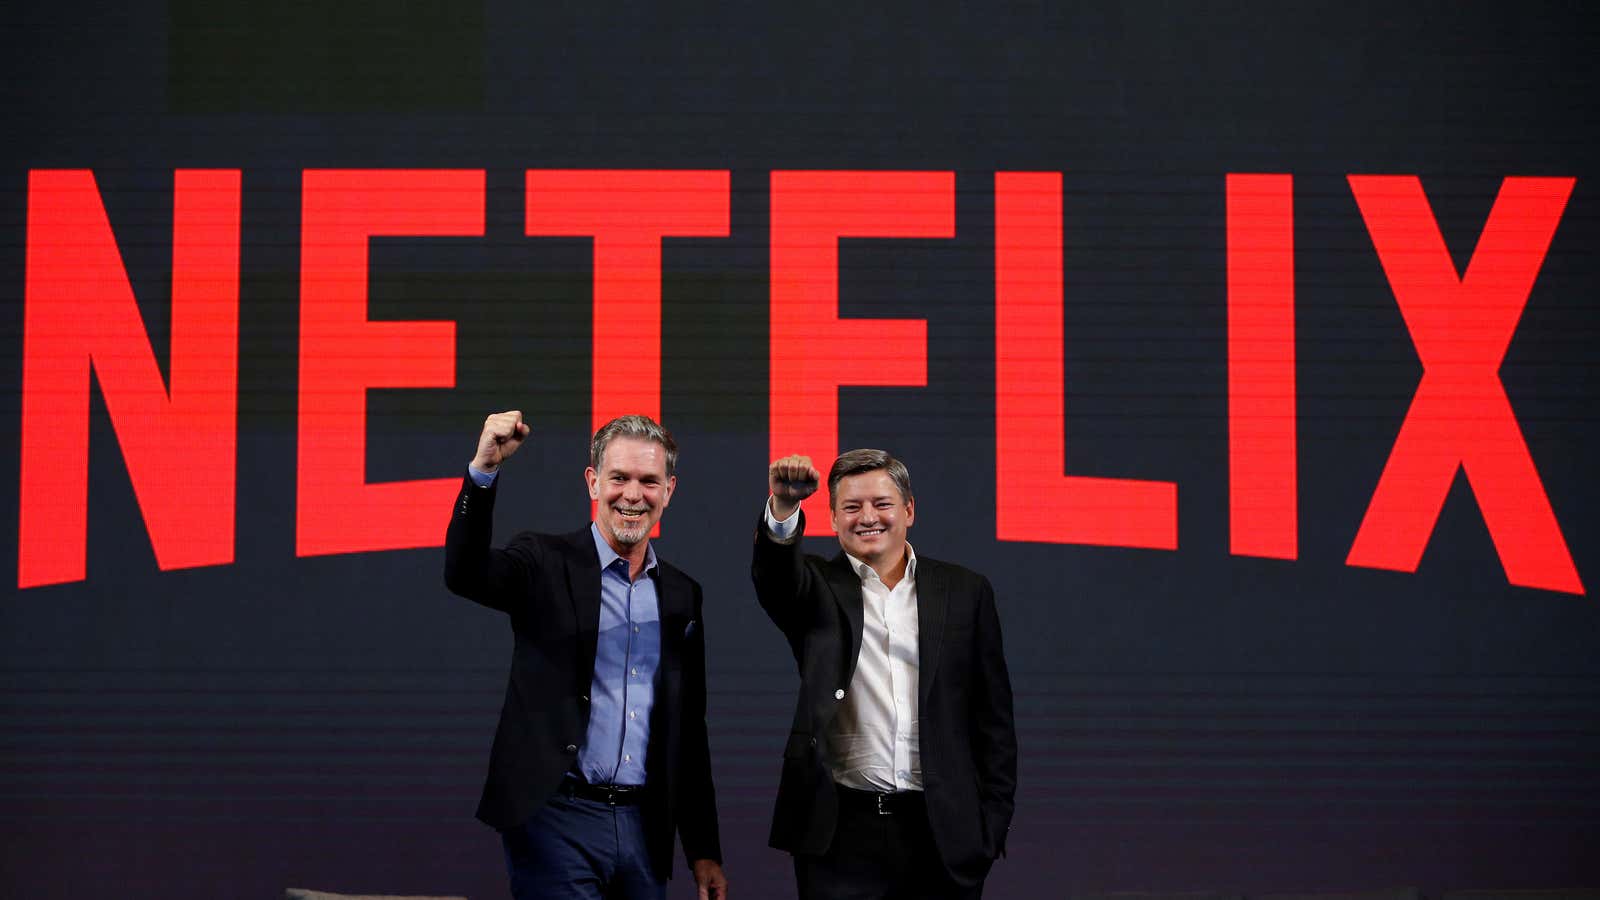 Netflix co-CEOs Reed Hastings and Ted Sarandos aspire to build a â€œculture of transparency.â€�